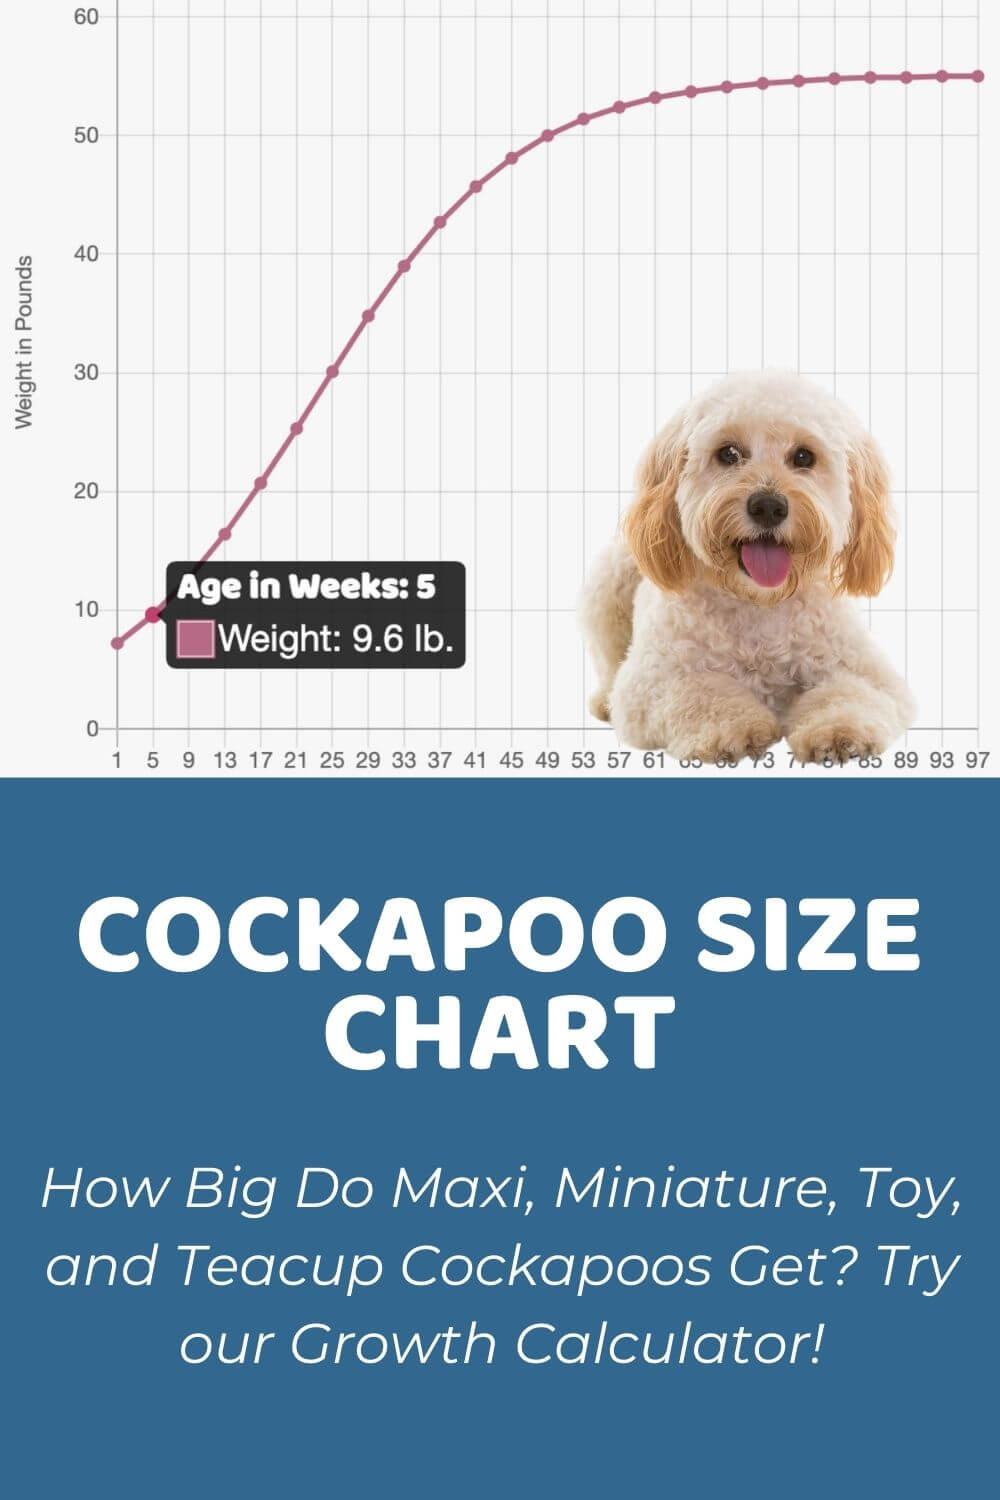 Cockapoo Price: How Much Do They Cost? Factors and ...